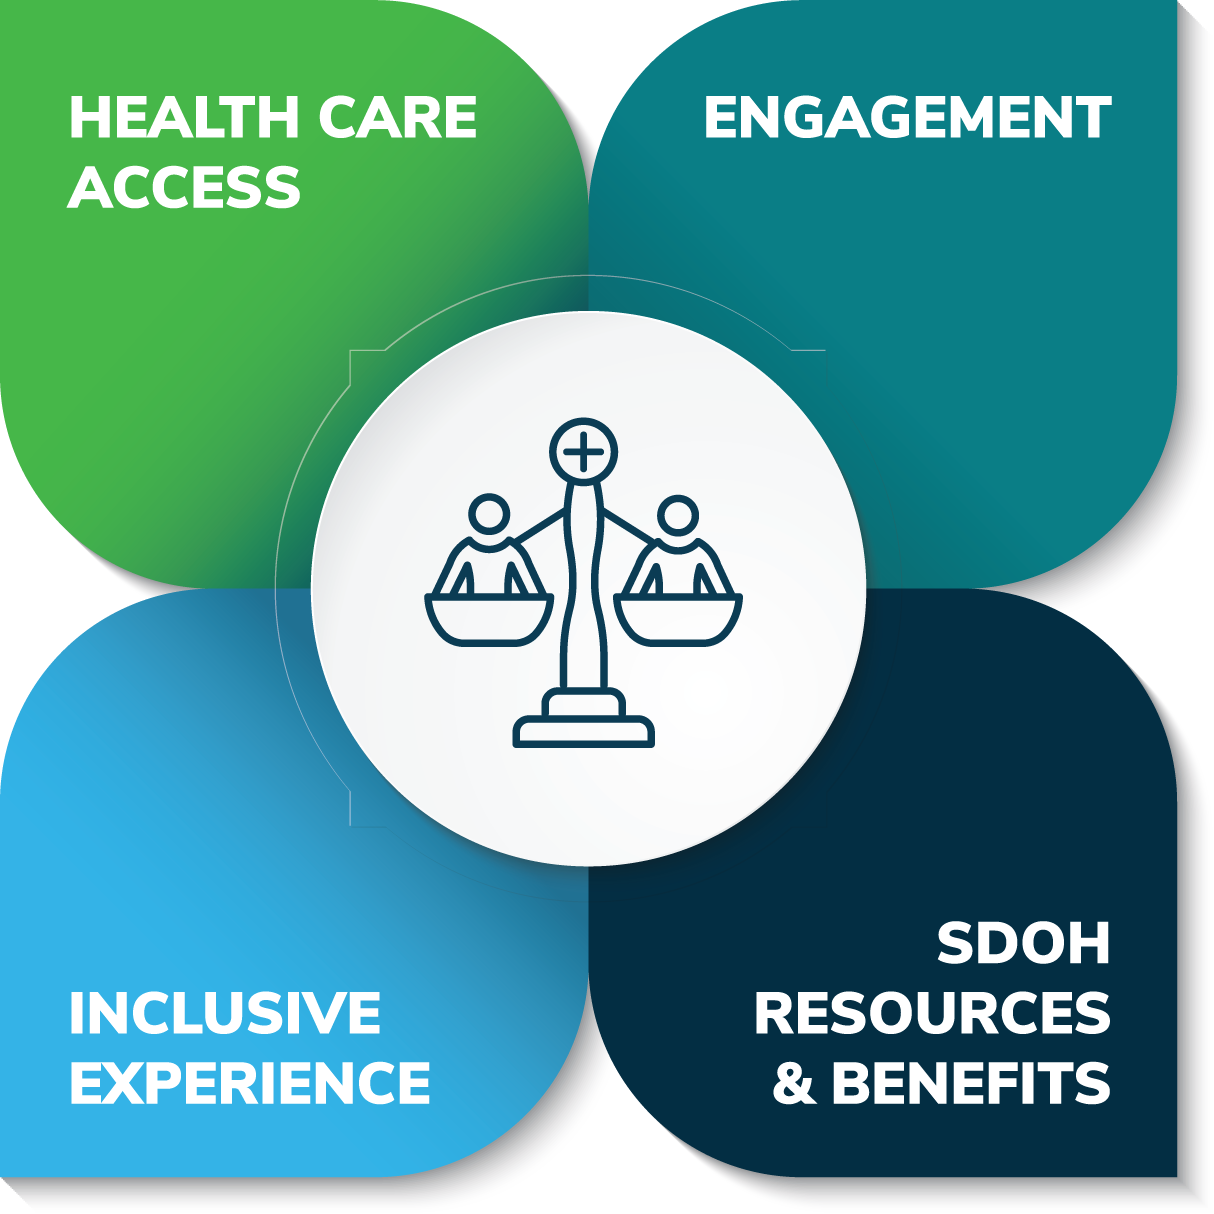 health care access, engagement, inclusive experience, SDOH resources & benefits